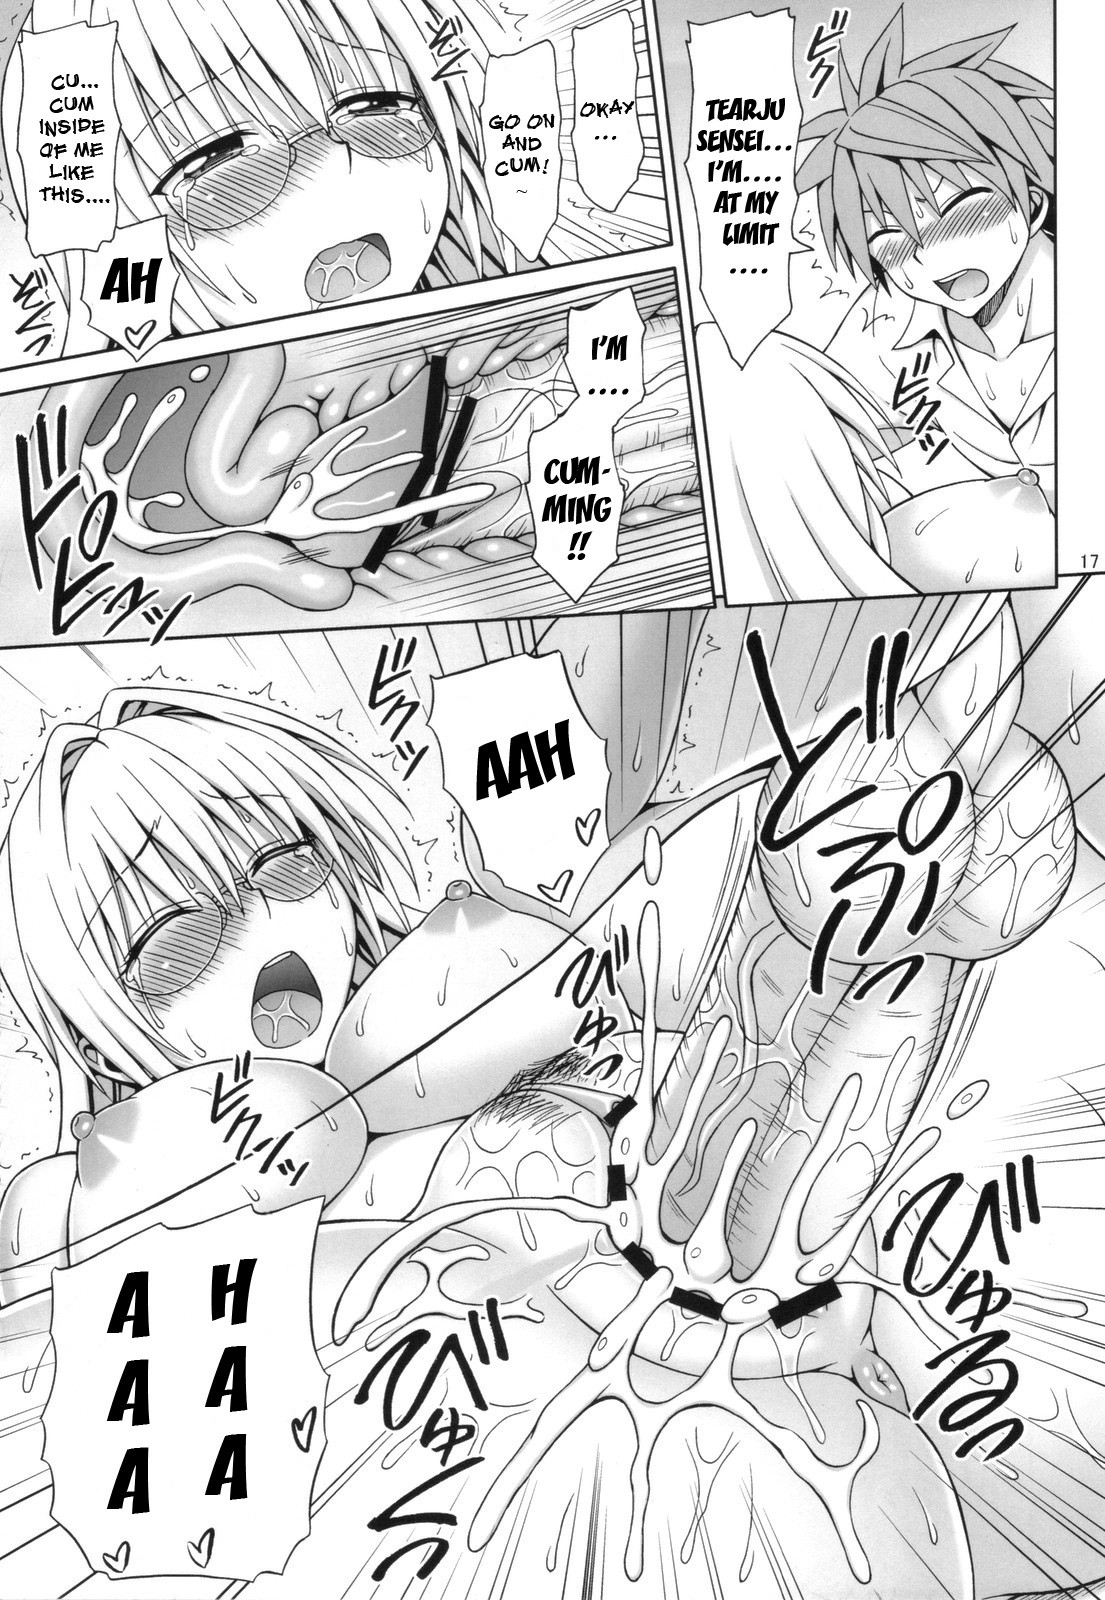 After-School Trouble hentai manga picture 16